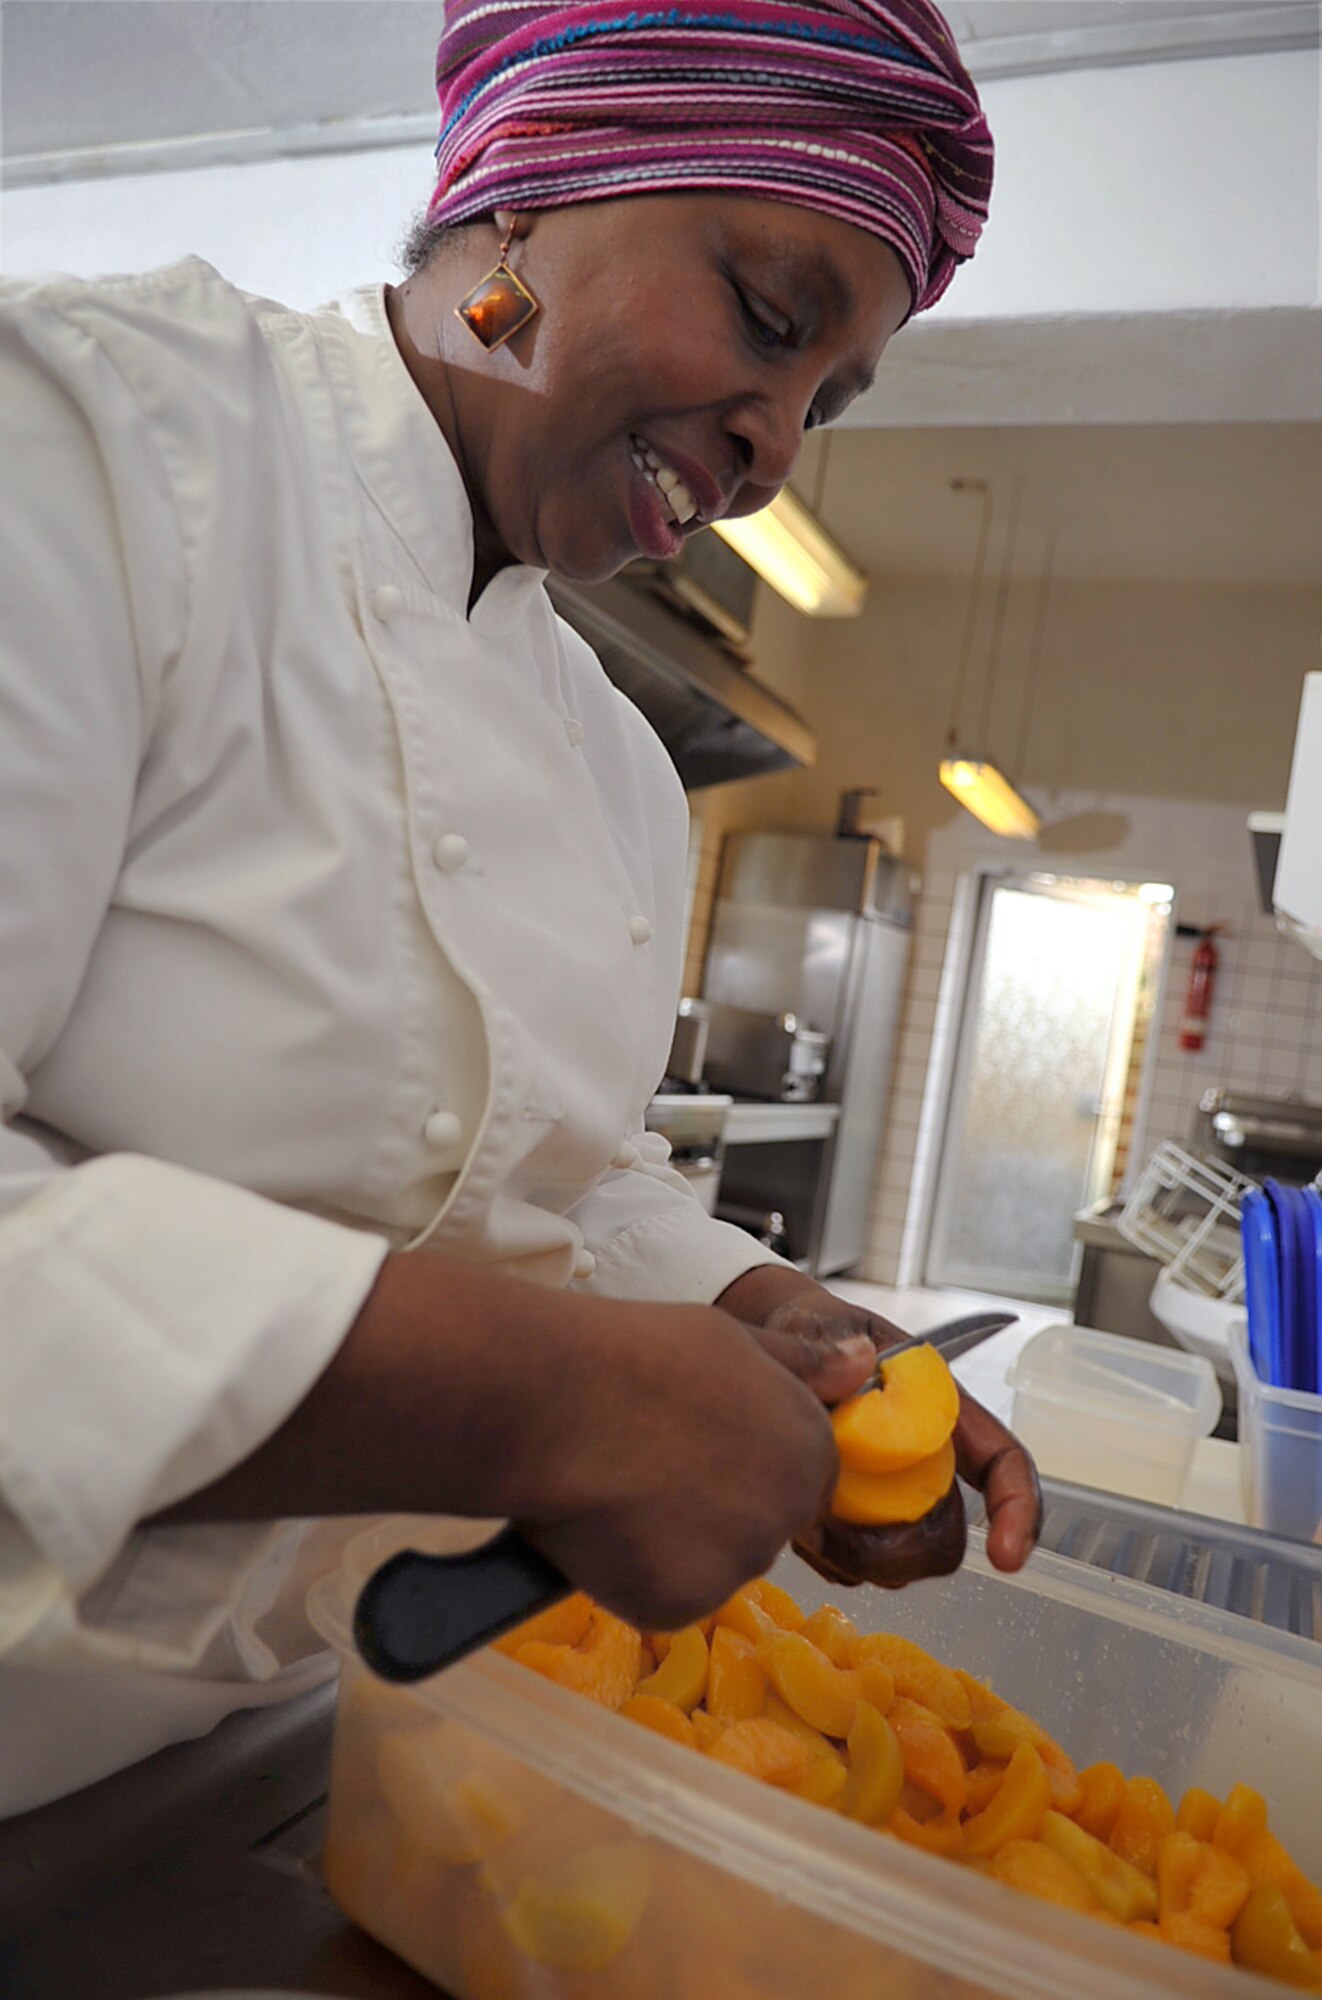 Brenda 'Mama' West, professional chef, prepares peaches to be baked into a peach cobbler in the kitchen of her restaurant, Ramstein village, Germany, Feb. 25, 2010. Mama West has been volunteering her time and cooking skills to feed U.S. servicemembers and wounded warriors in the KMC for over a decade. (U.S. Air Force photo by Senior Airman Tony R. Ritter) 
 
